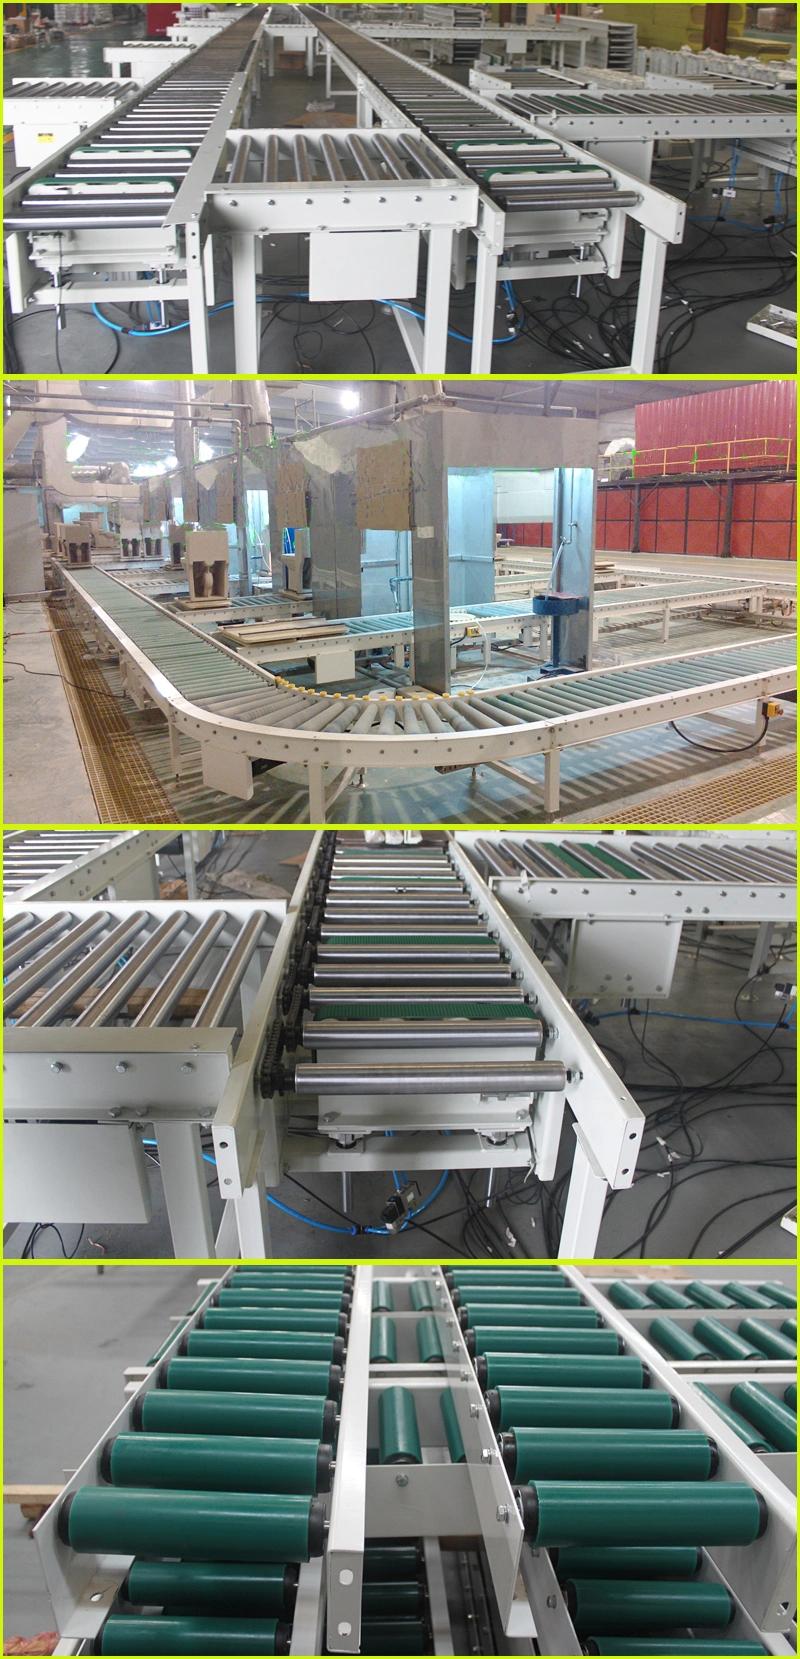 Horizontal Double Layers Roller Conveyor Line for Bag Parcel Luggage Transmission